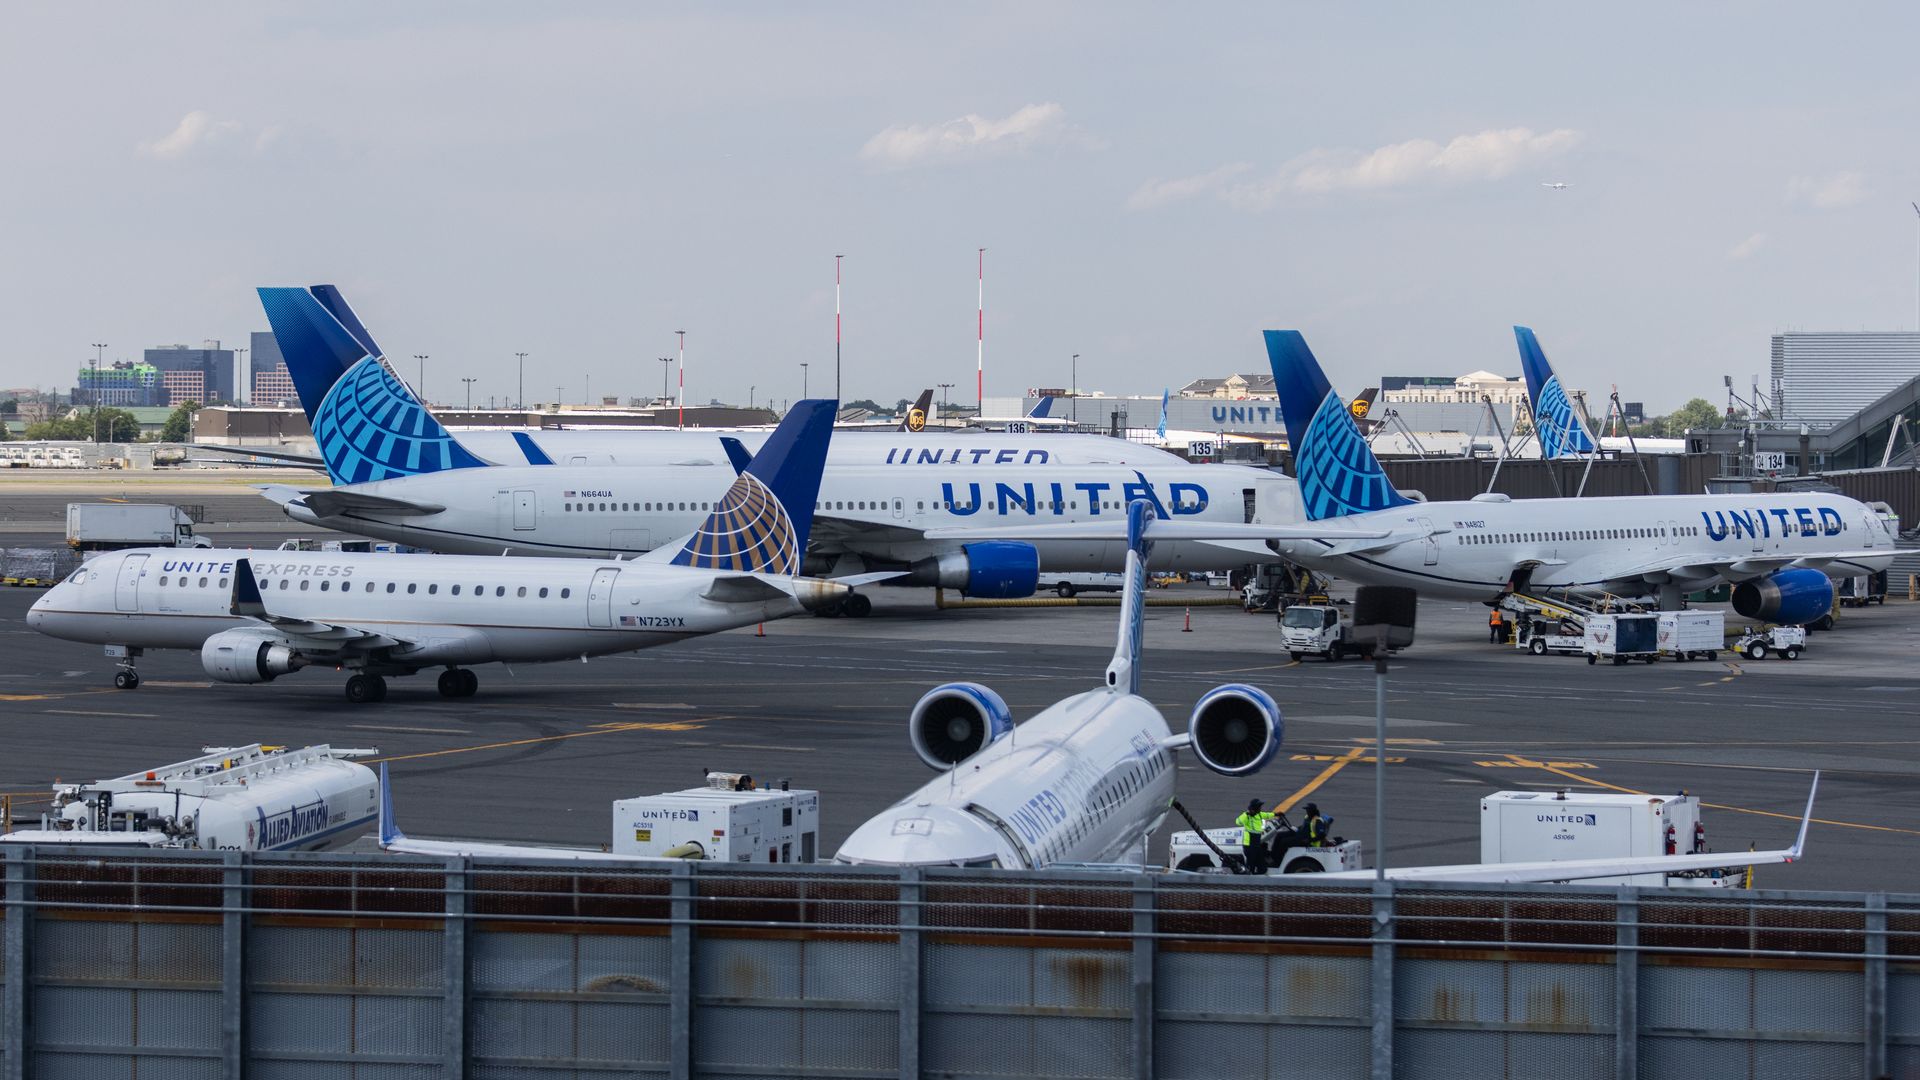 United Airlines aircraft are seen at Newark Liberty International Airport in July.